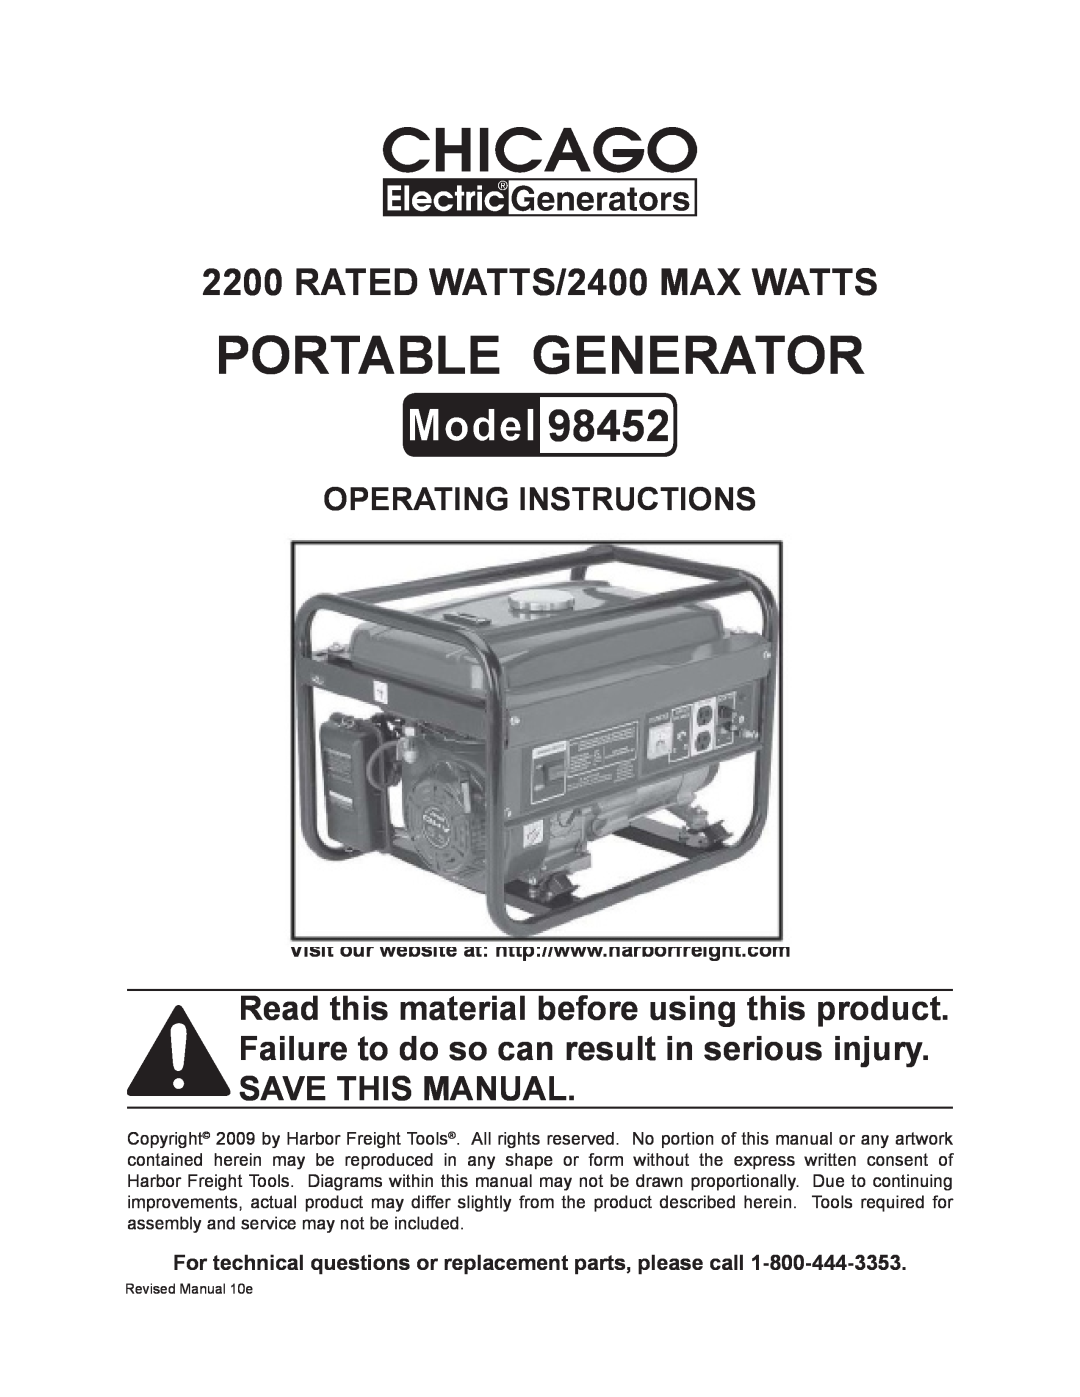 Chicago Electric 98452 operating instructions Operating Instructions, Portable Generator, RATED WATTS/2400 MAX WATTS 